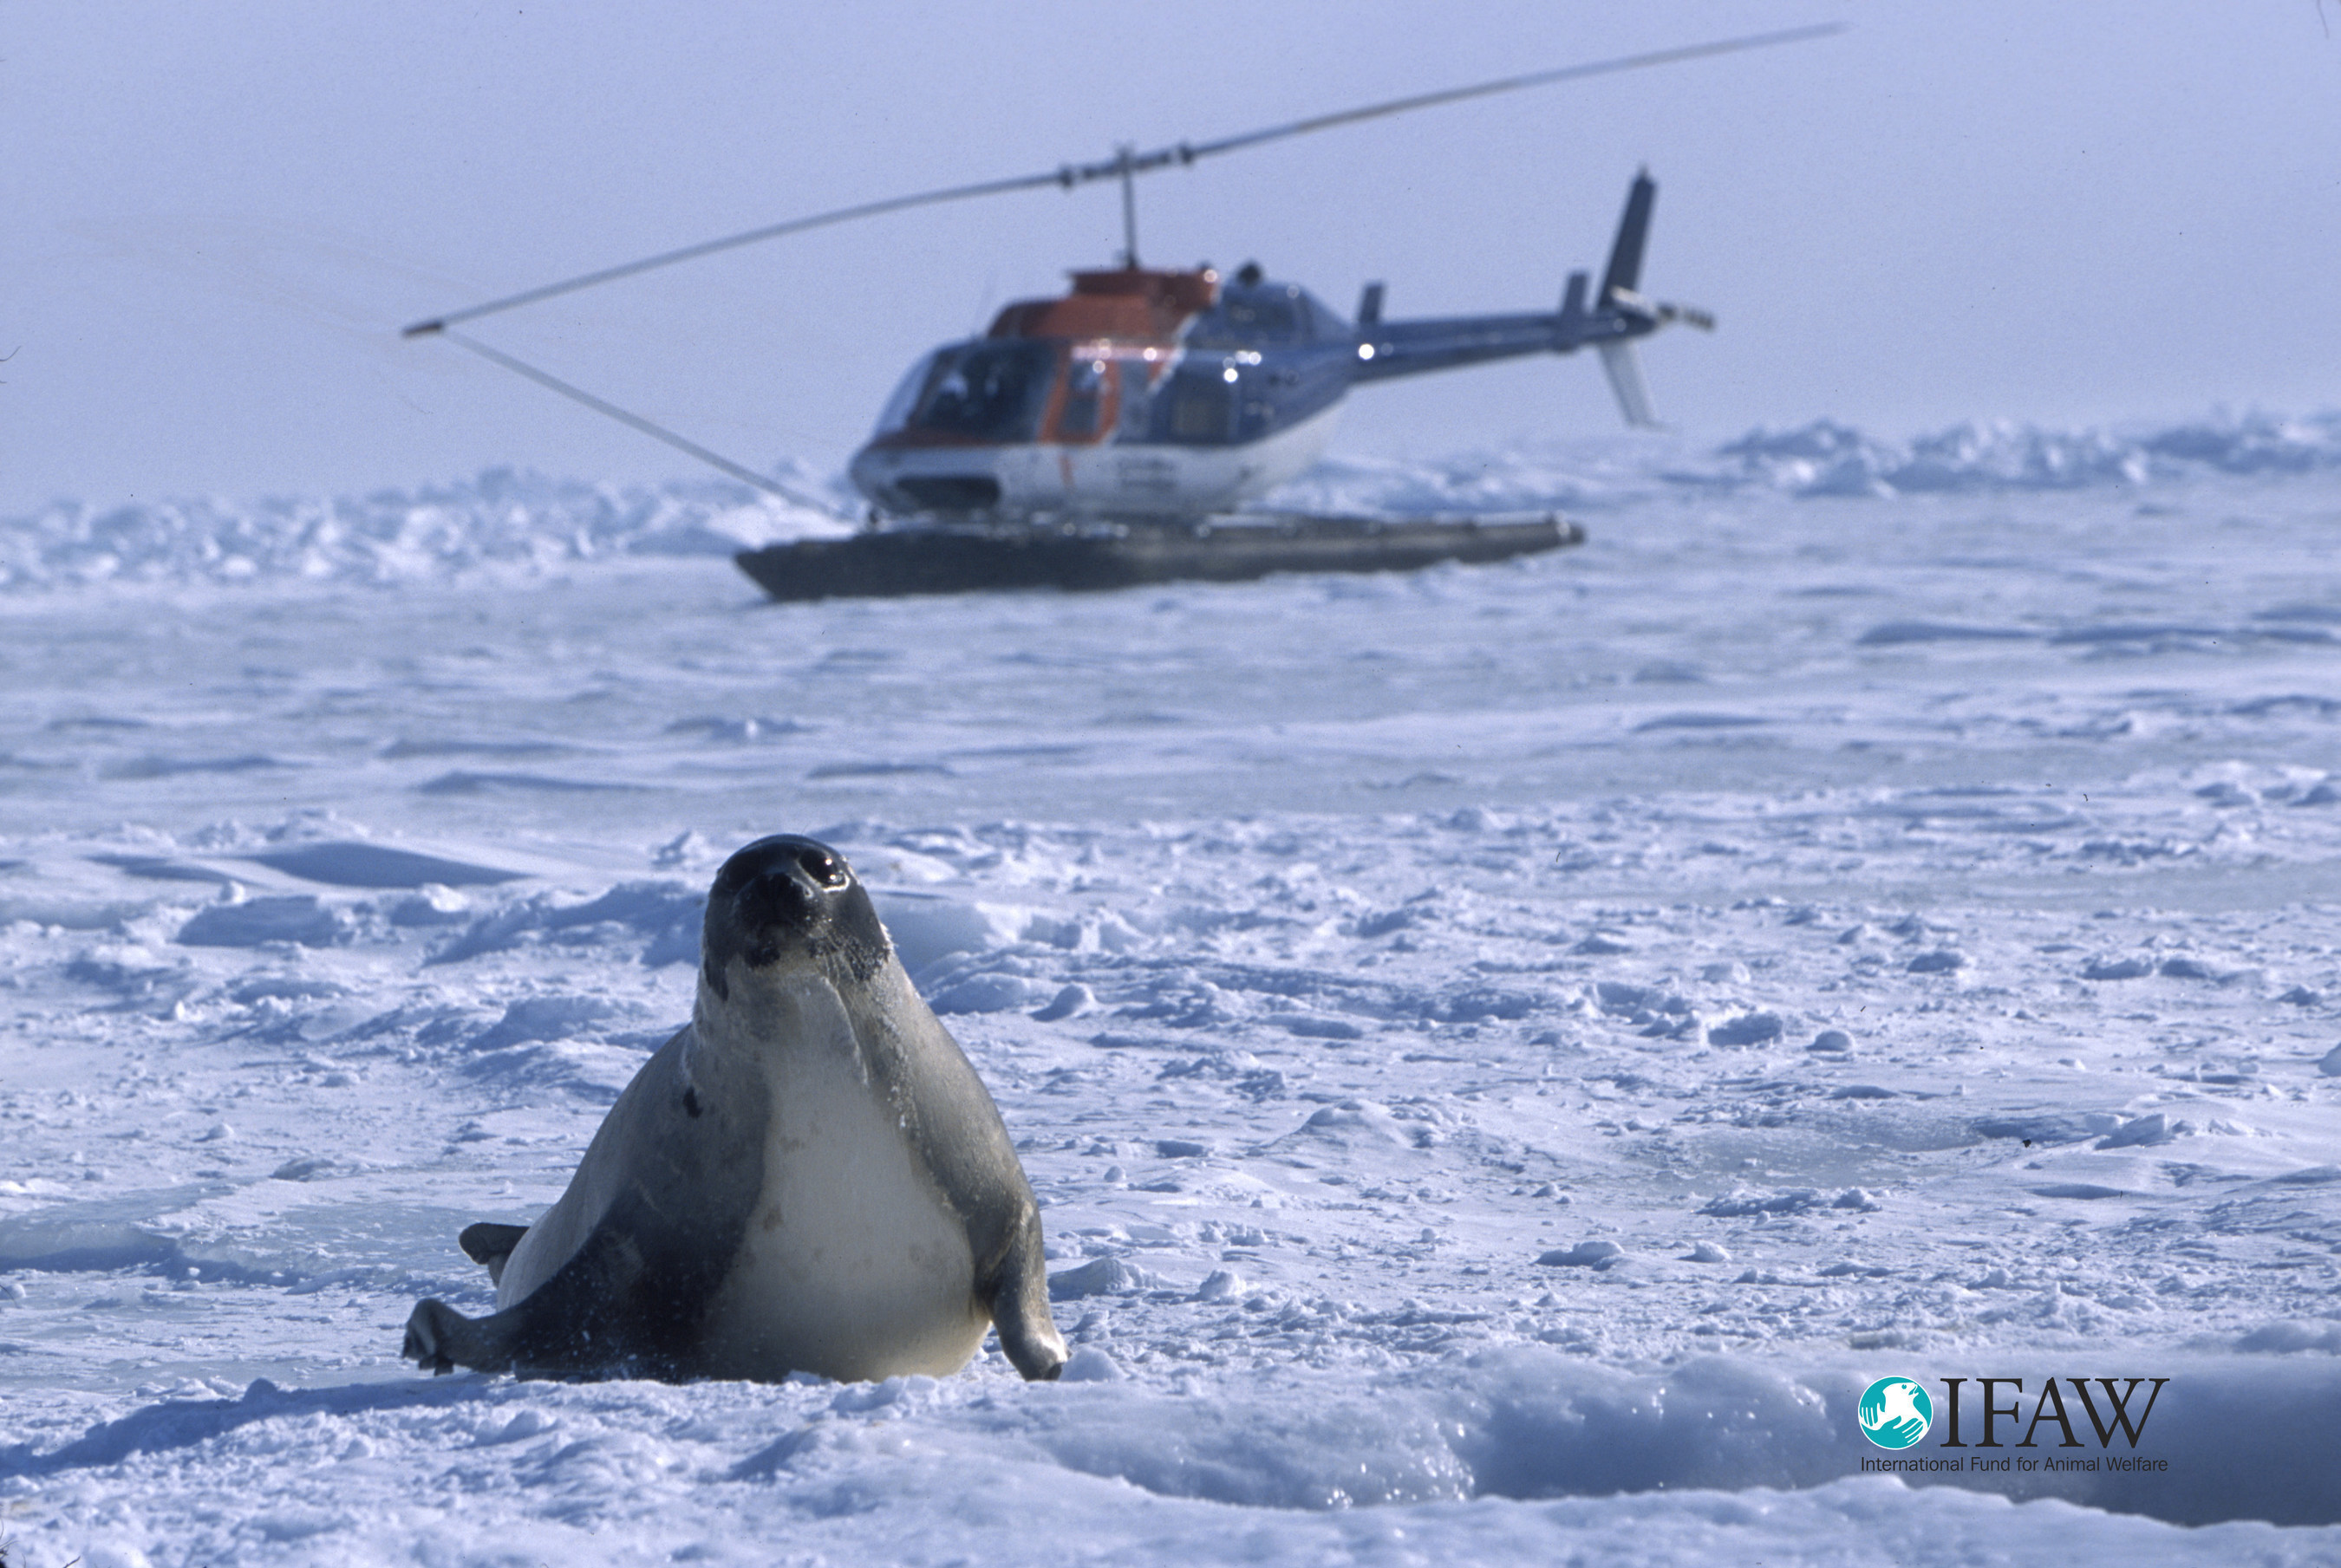 An adult harp seal looks ahead as a helicopter lands in the Gulf of St. Lawrence, Canada in 2003.